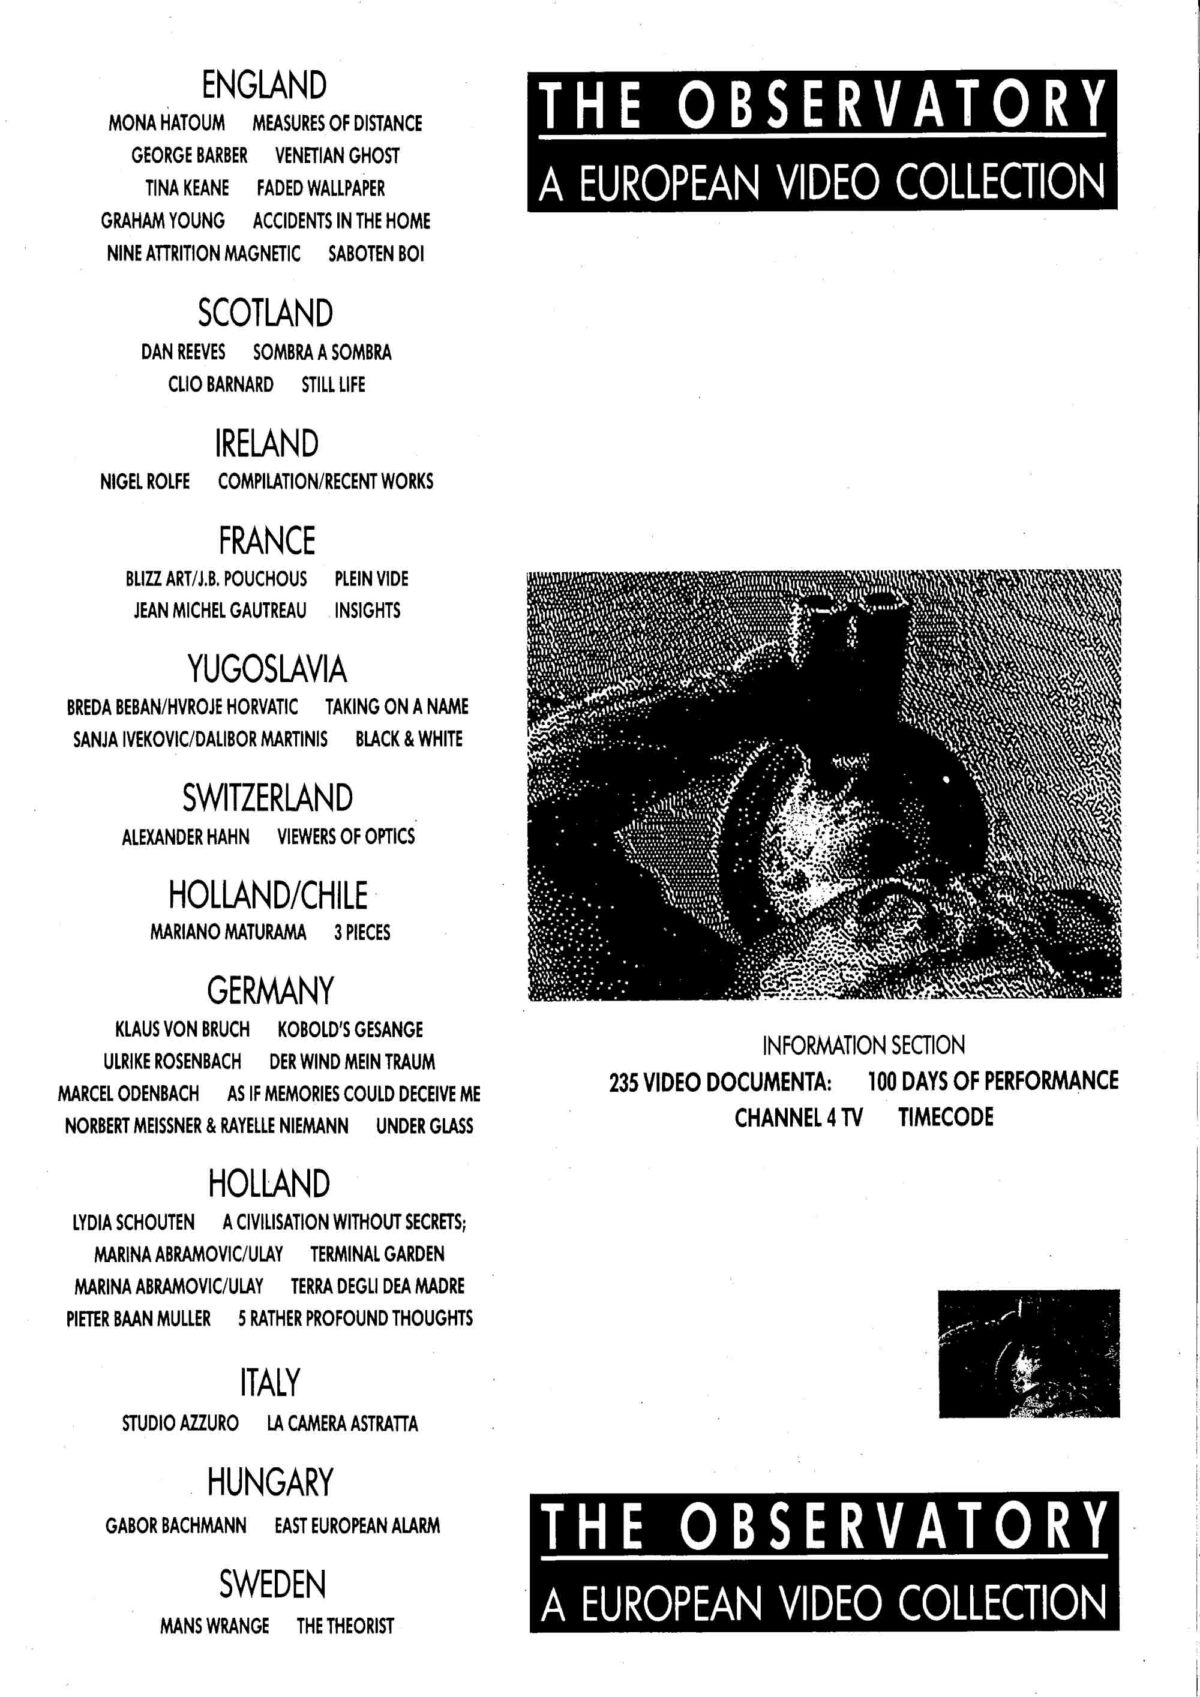 The Observatory video programme, 1988 (Page 2 of 2)